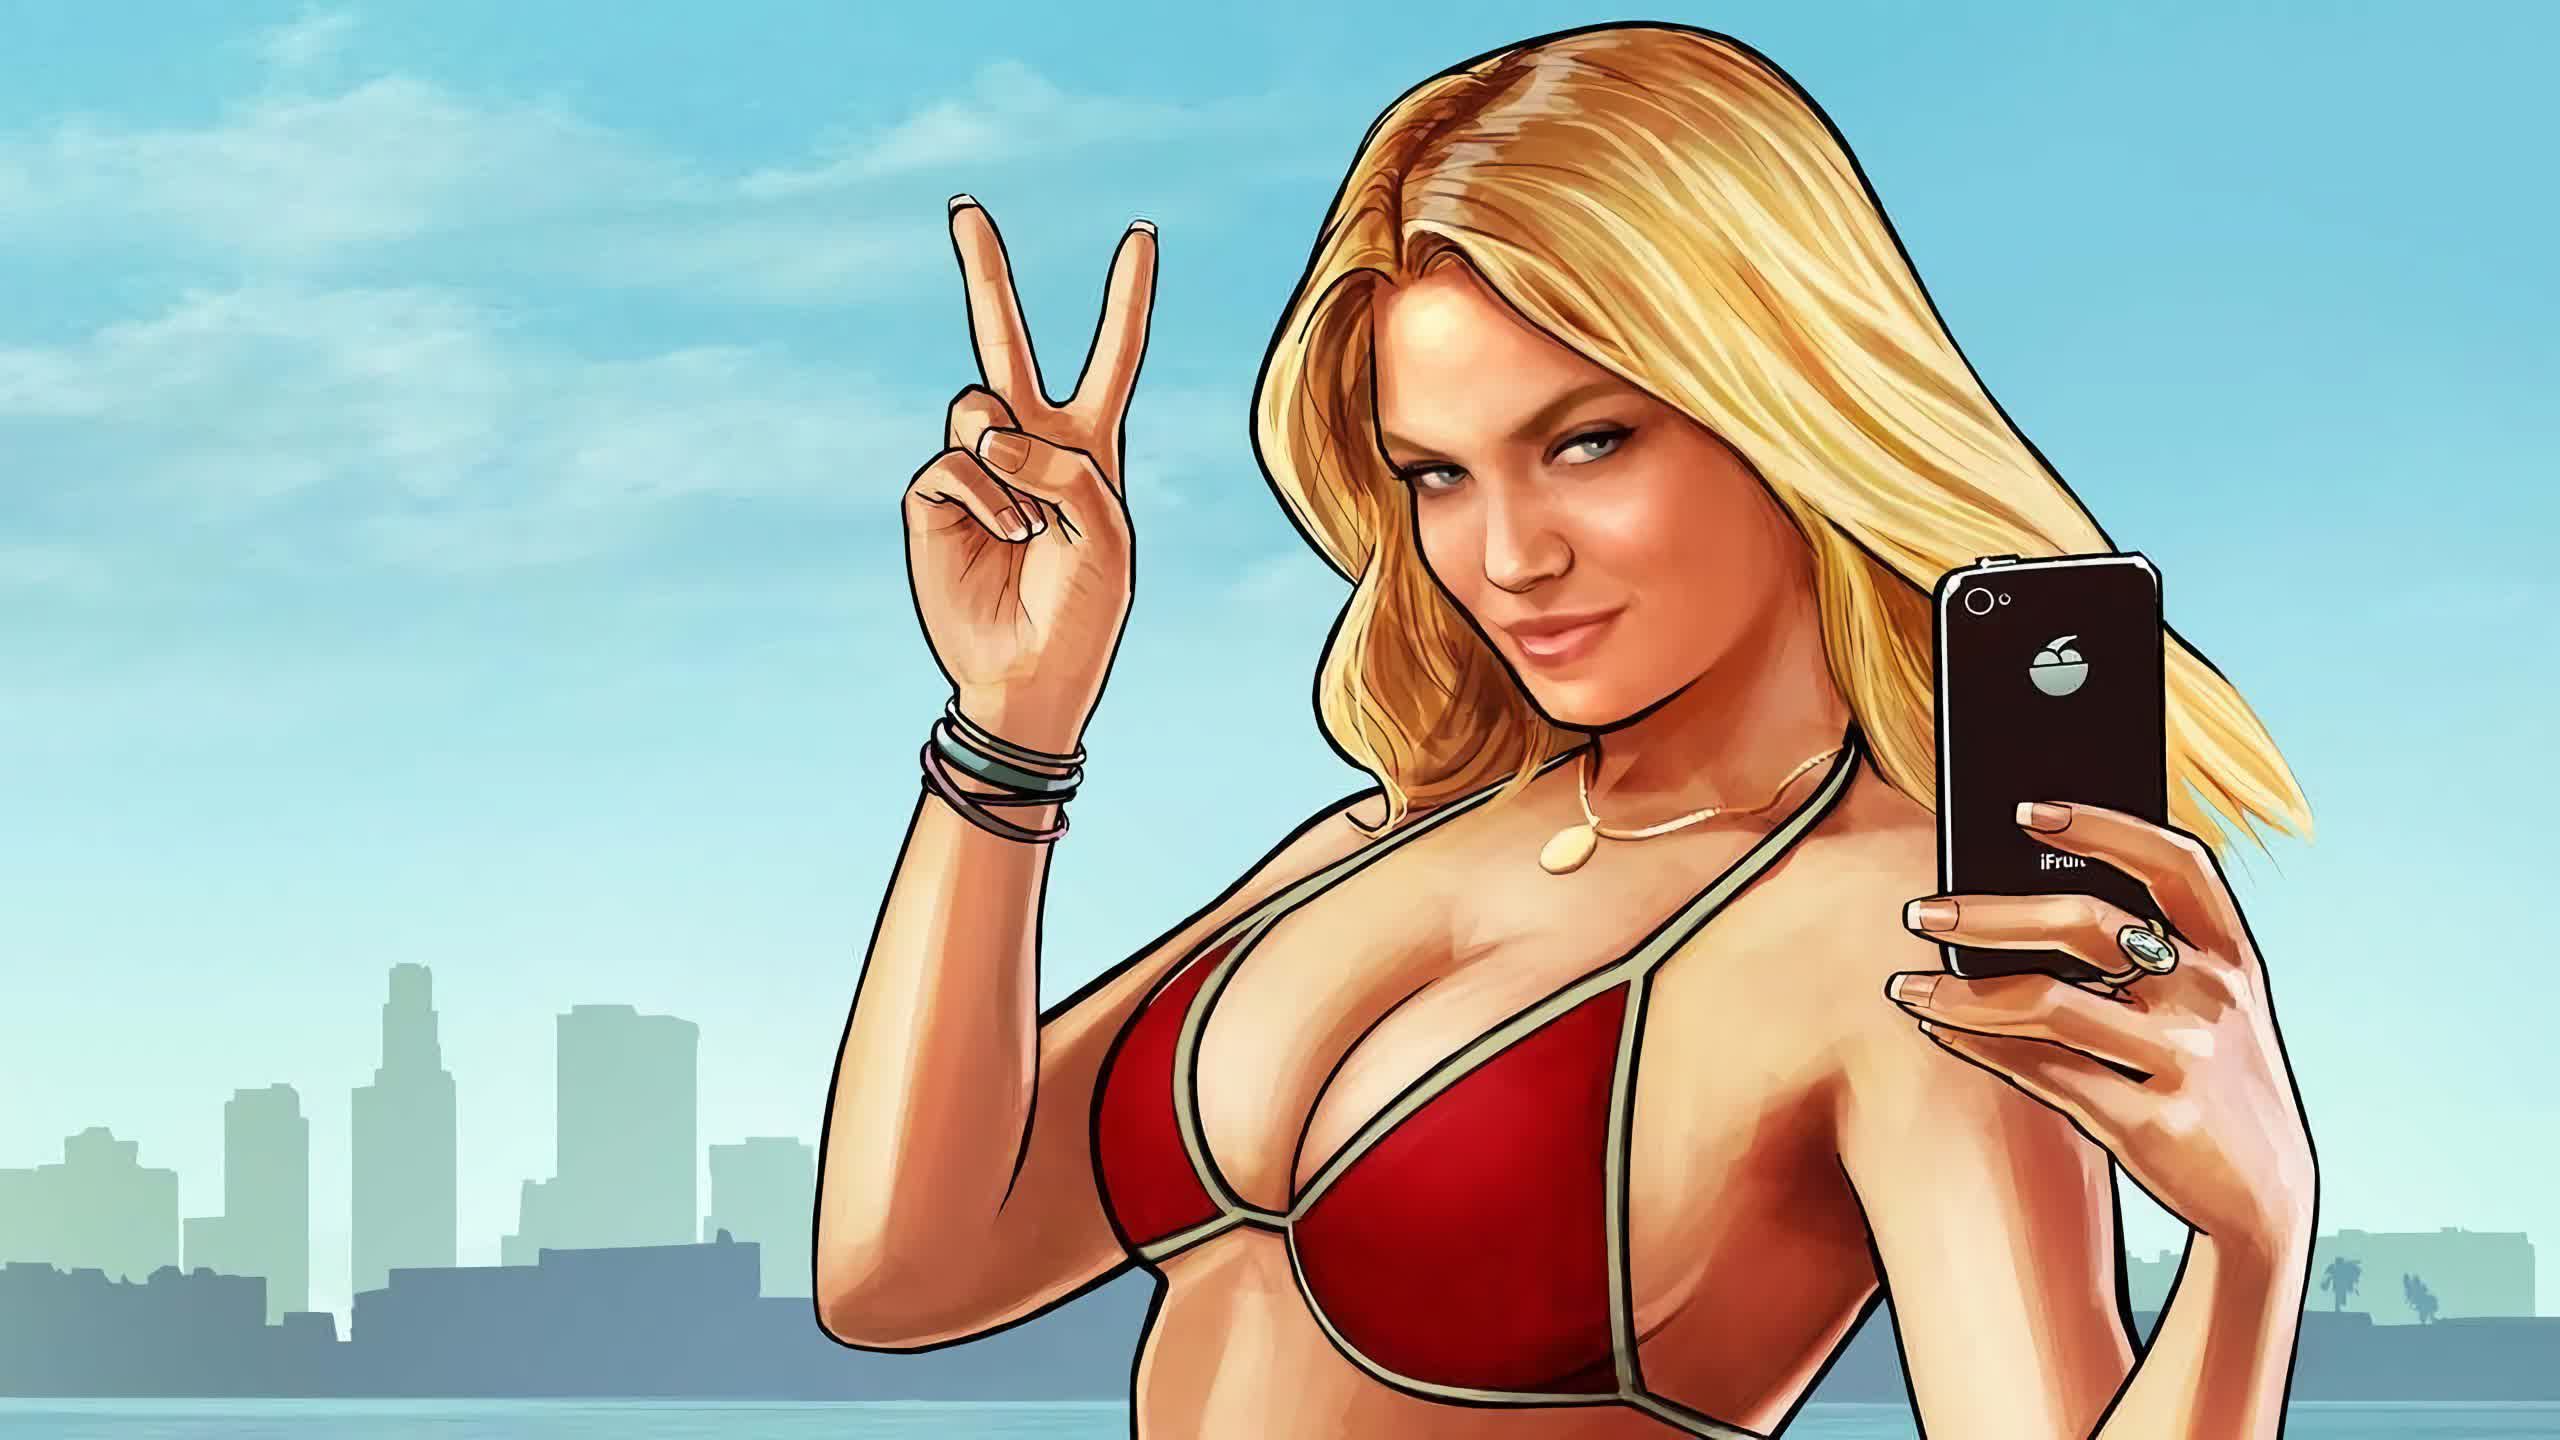 Rockstar might add a female playable character to Grand Theft Auto VI